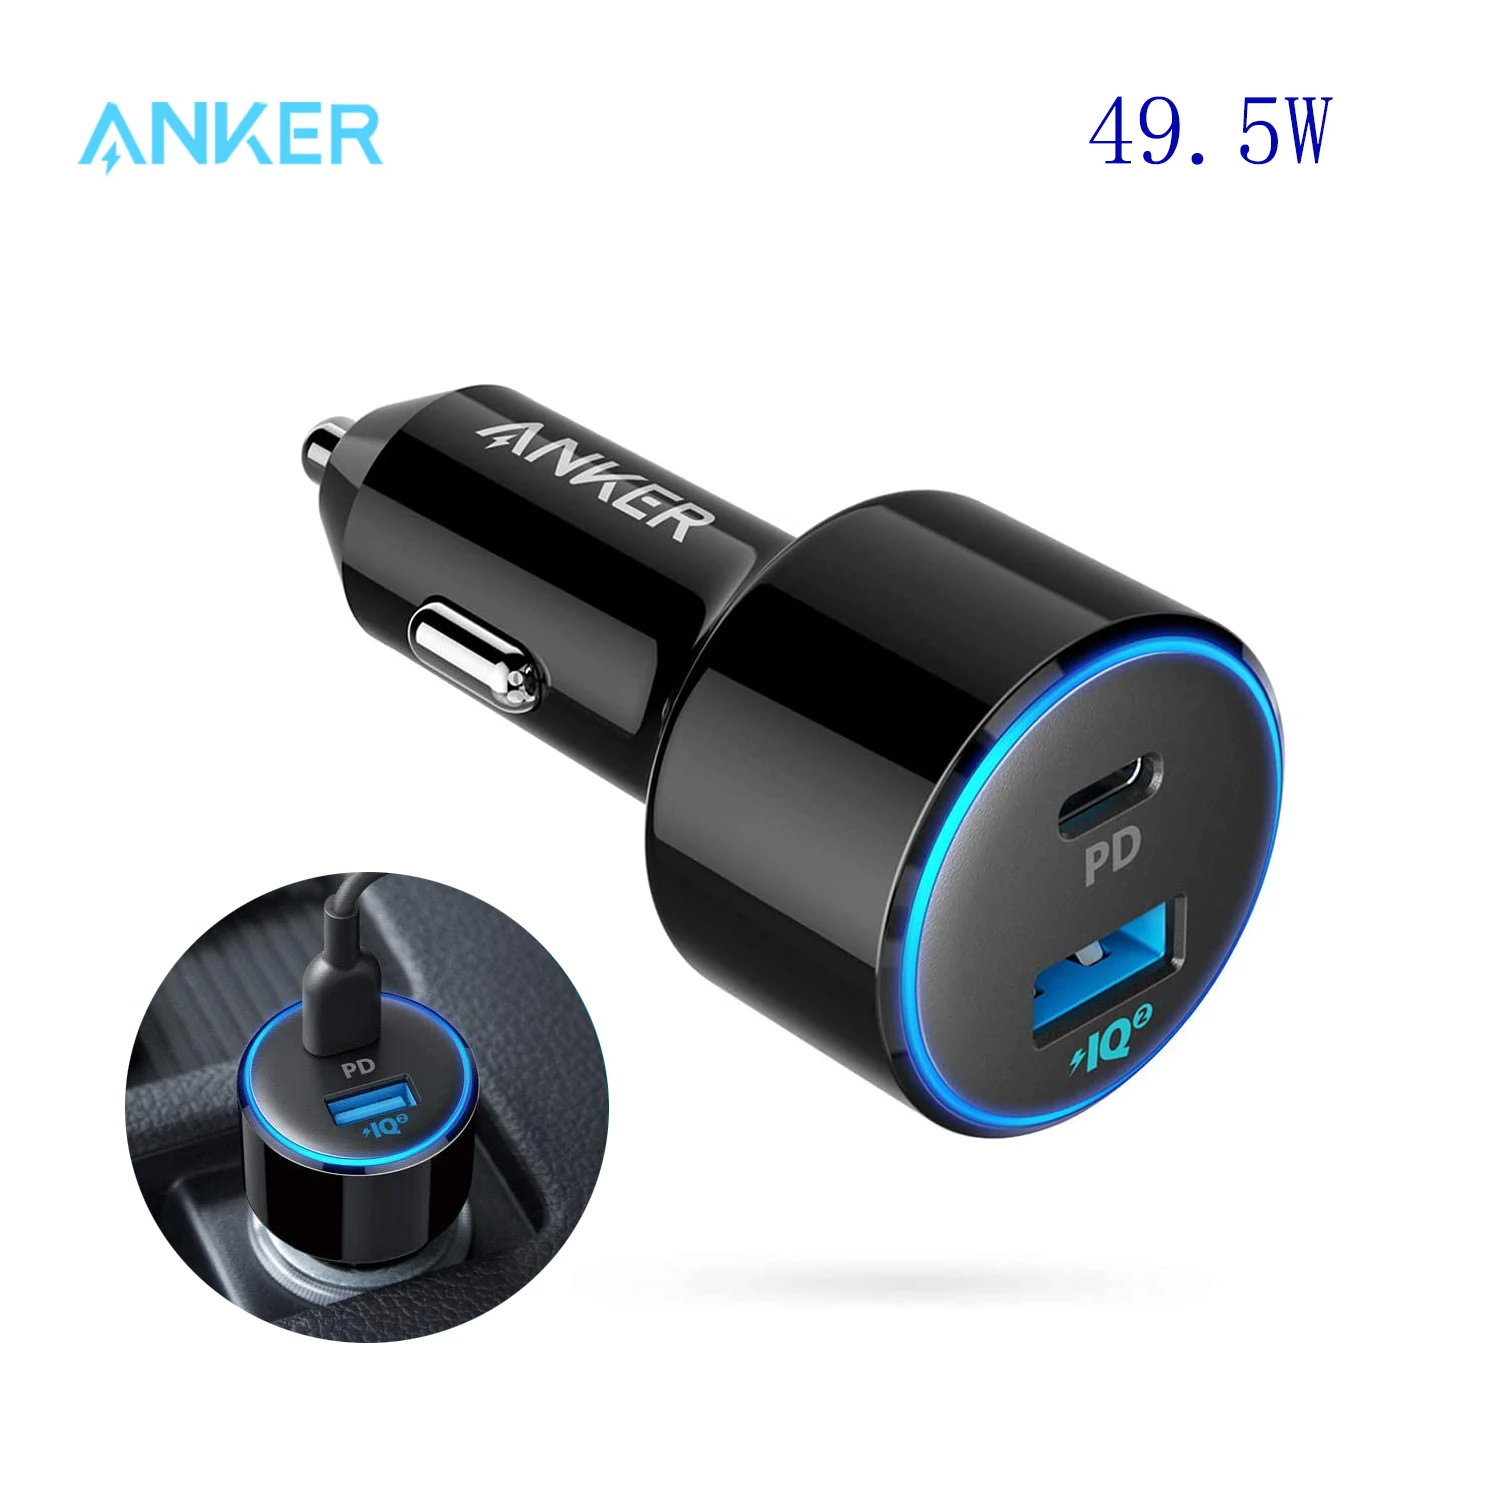 

USB C Car Charger, Anker 49.5W PowerDrive Speed+ 2 Adapter with One 30W PD Port for MacBook Pro/Air 2018, iPad Pro, iPhone XS